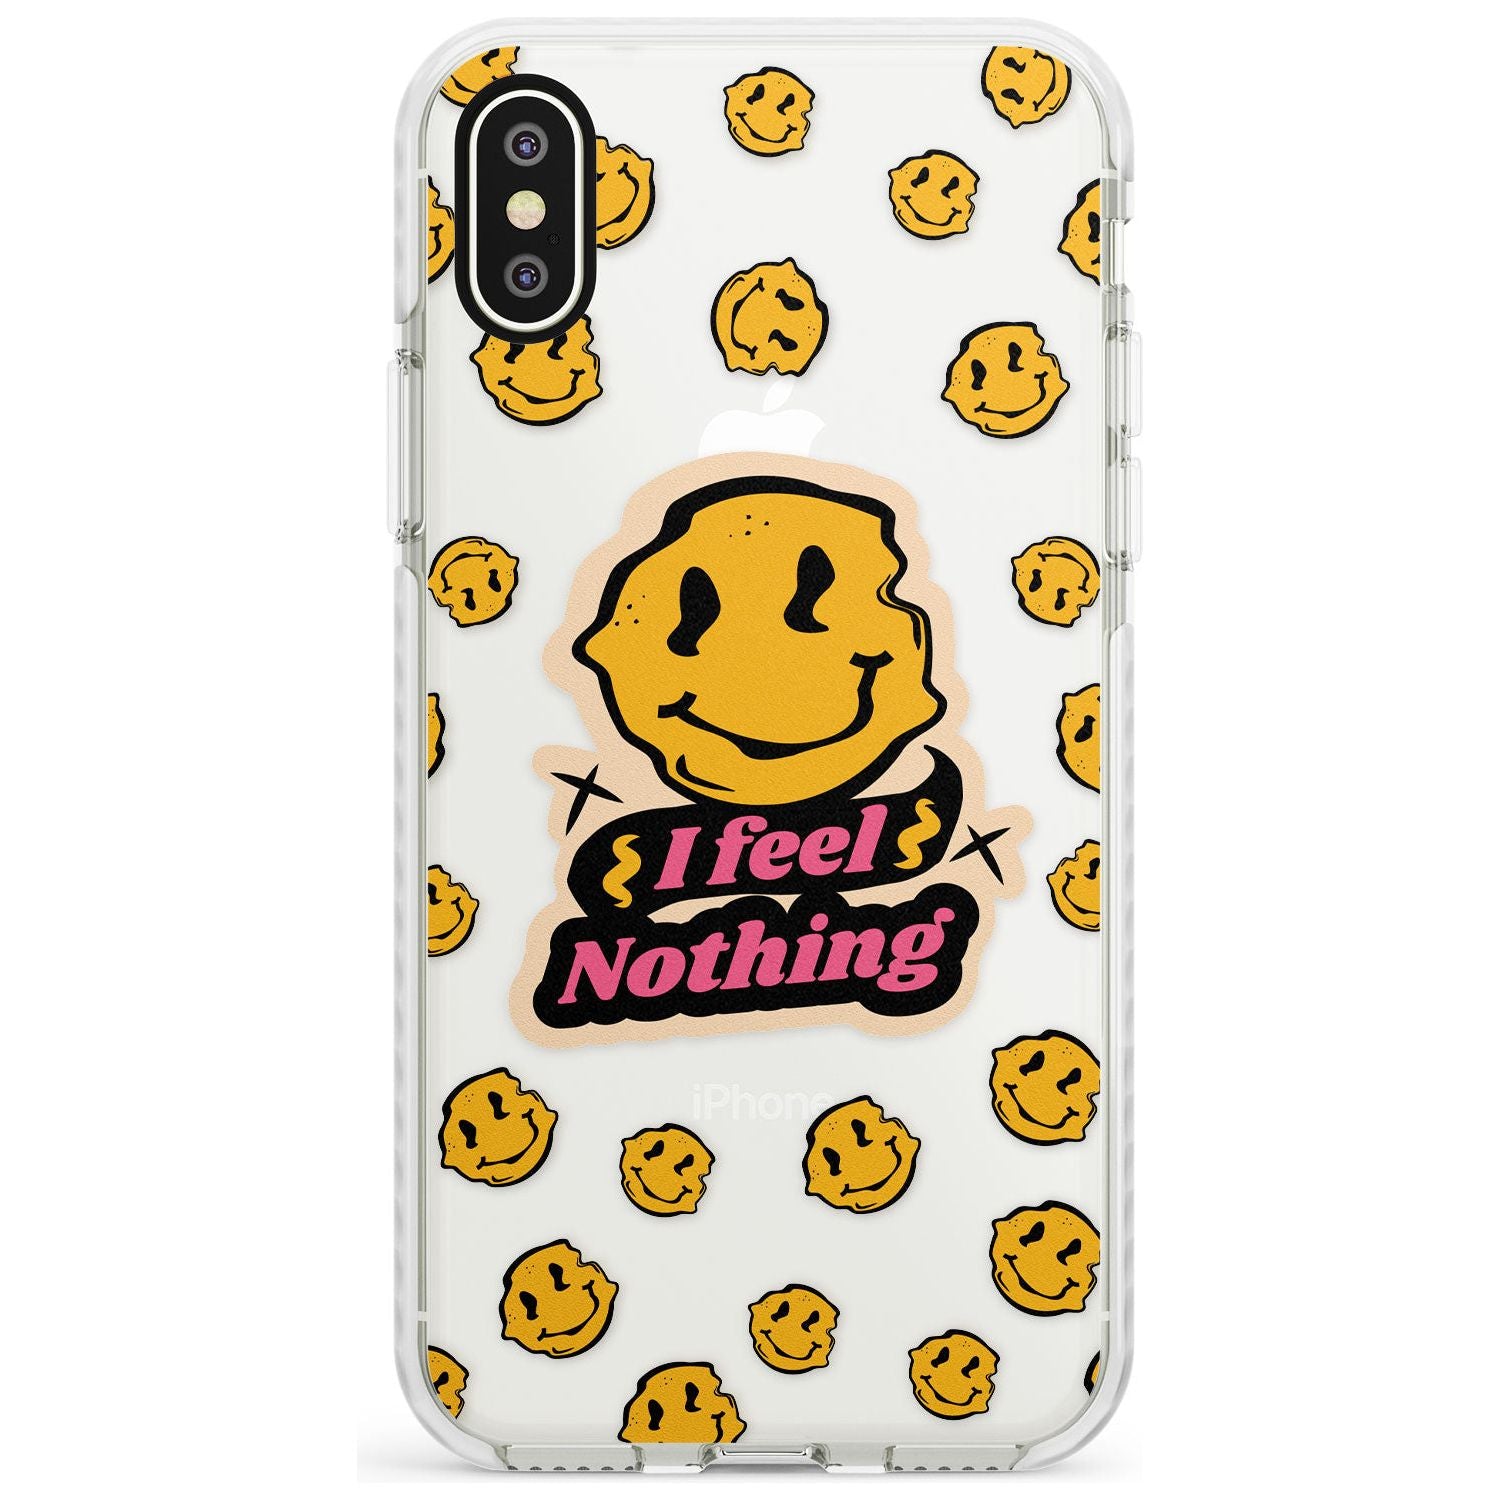 I feel nothing (Clear) Impact Phone Case for iPhone X XS Max XR